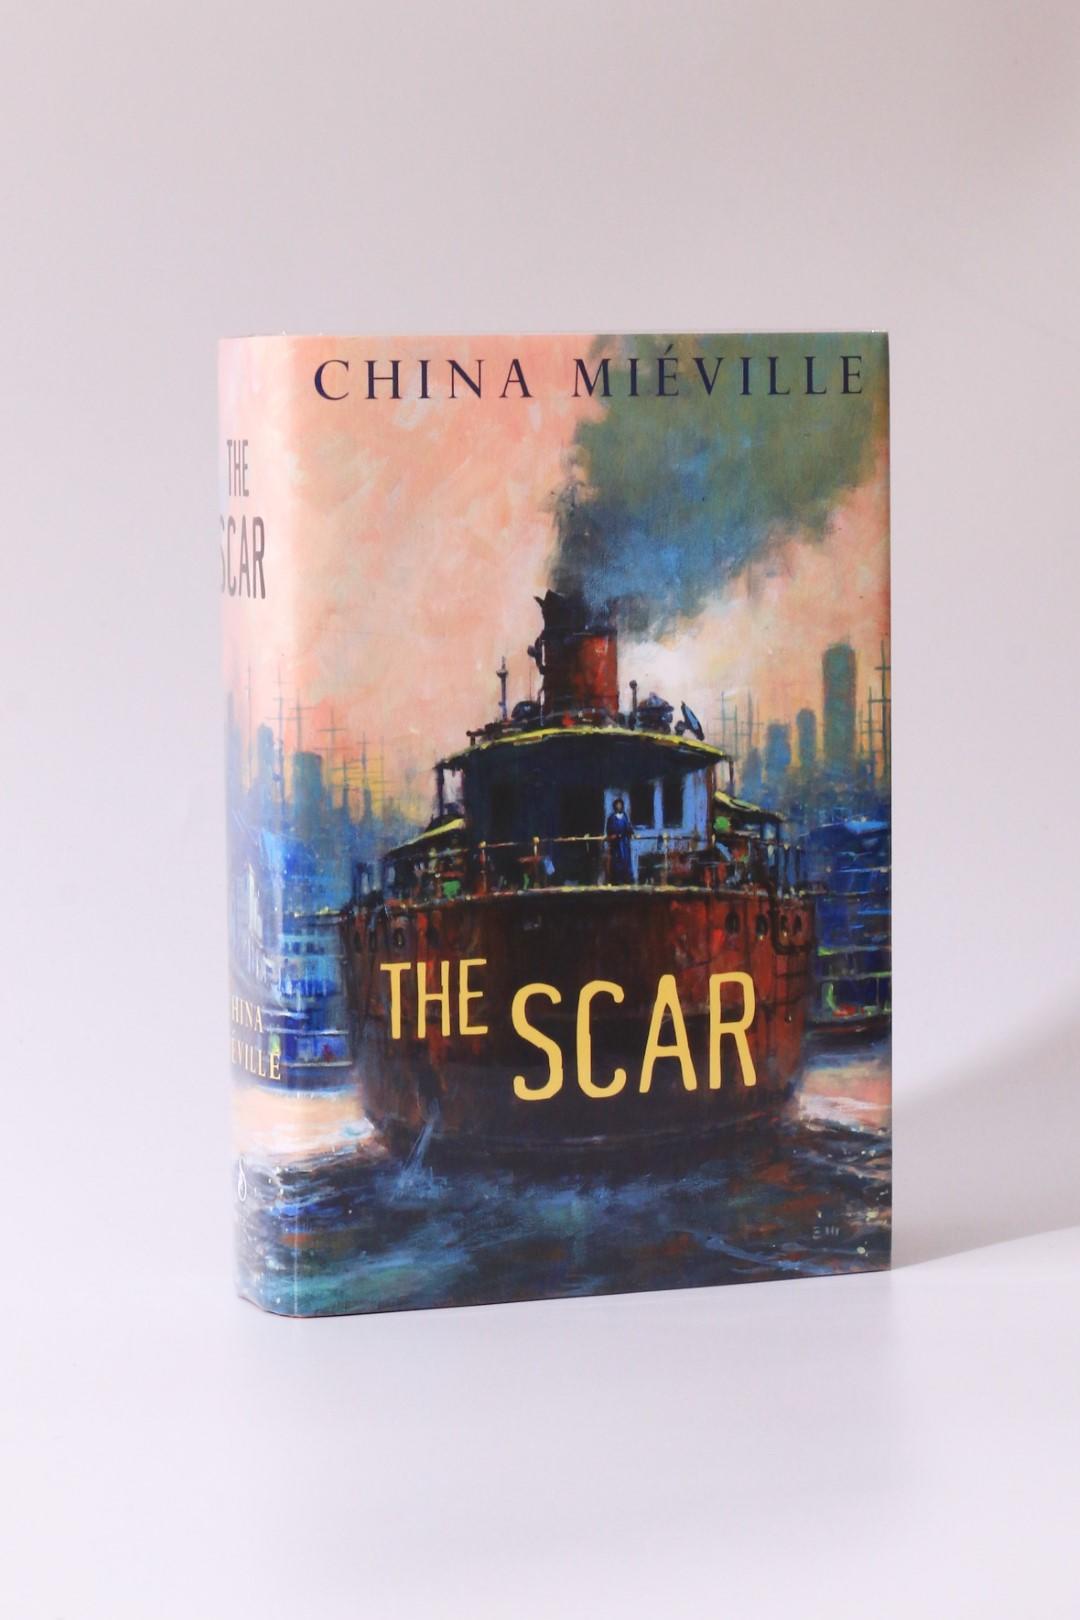 China Mieville - The Scar - Subterranean Press, 2019, Signed Limited Edition.